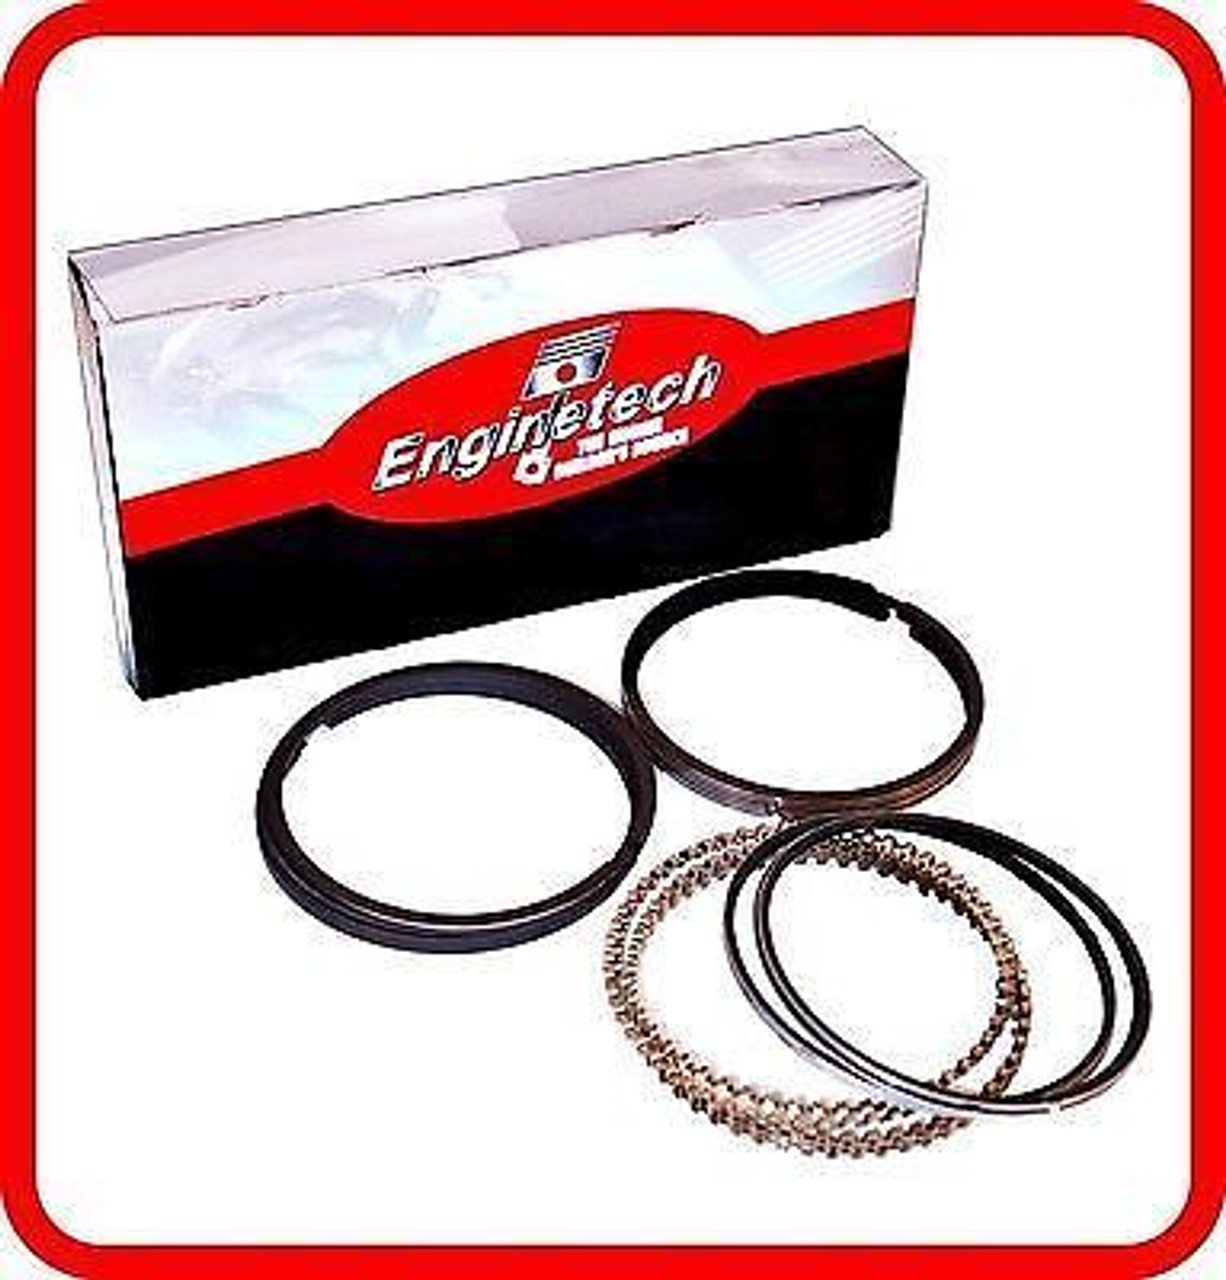 1993 Plymouth Grand Voyager 3.0L Engine Piston Ring Set M91146 -330